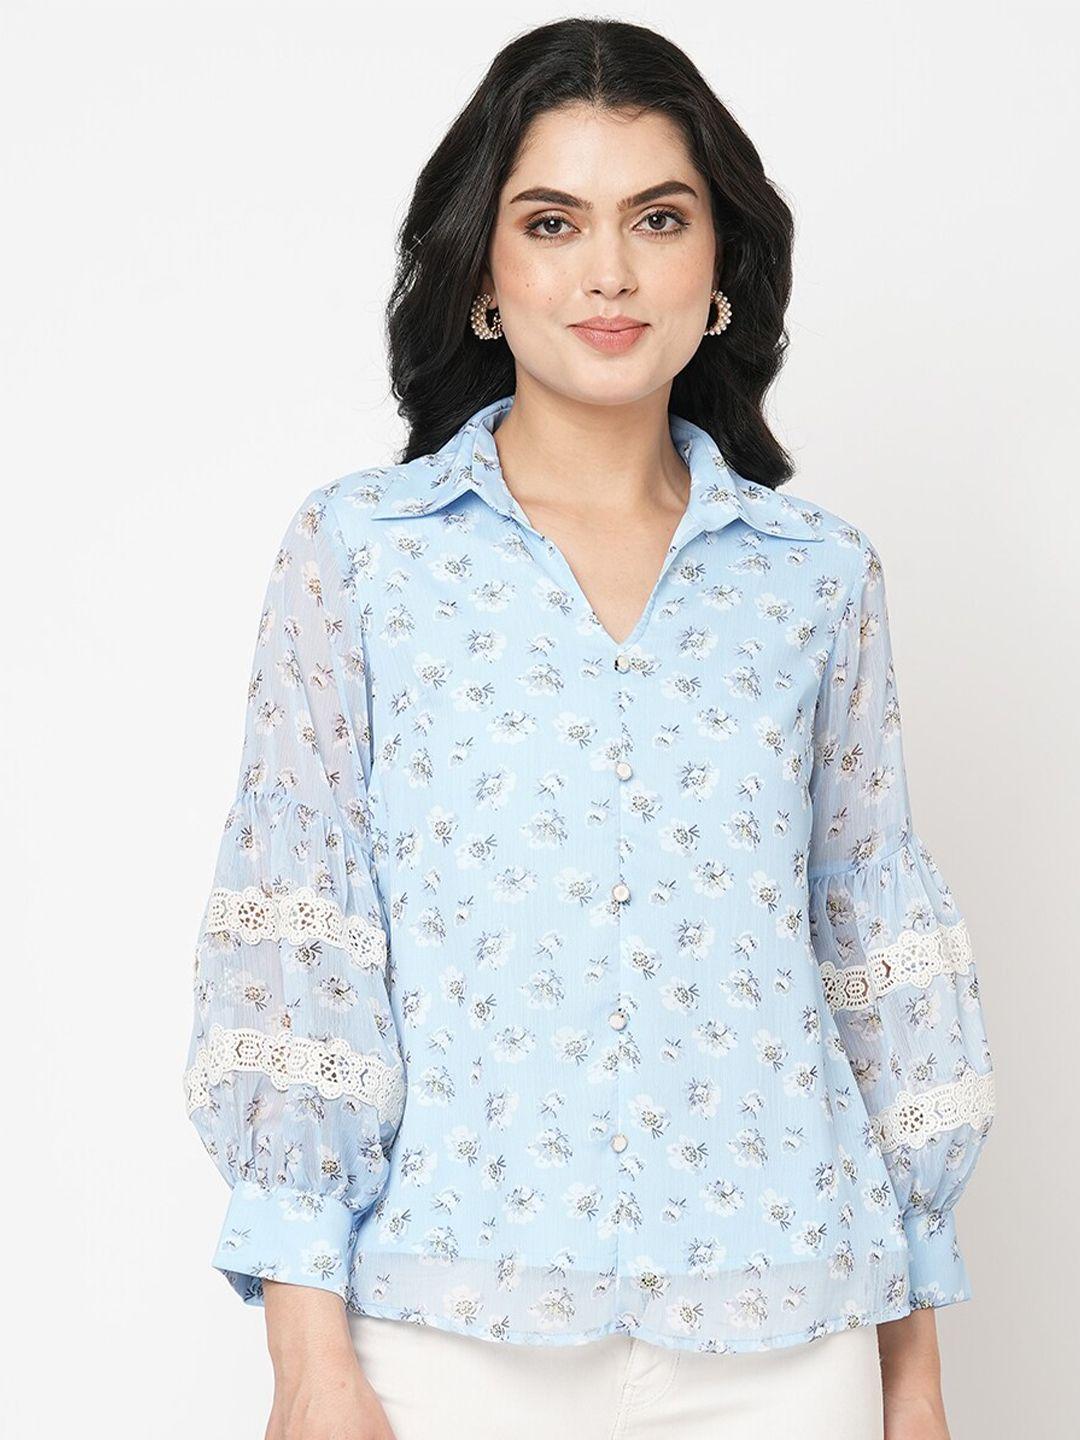 mish blue floral printed shirt collar cuffed sleeves shirt style top